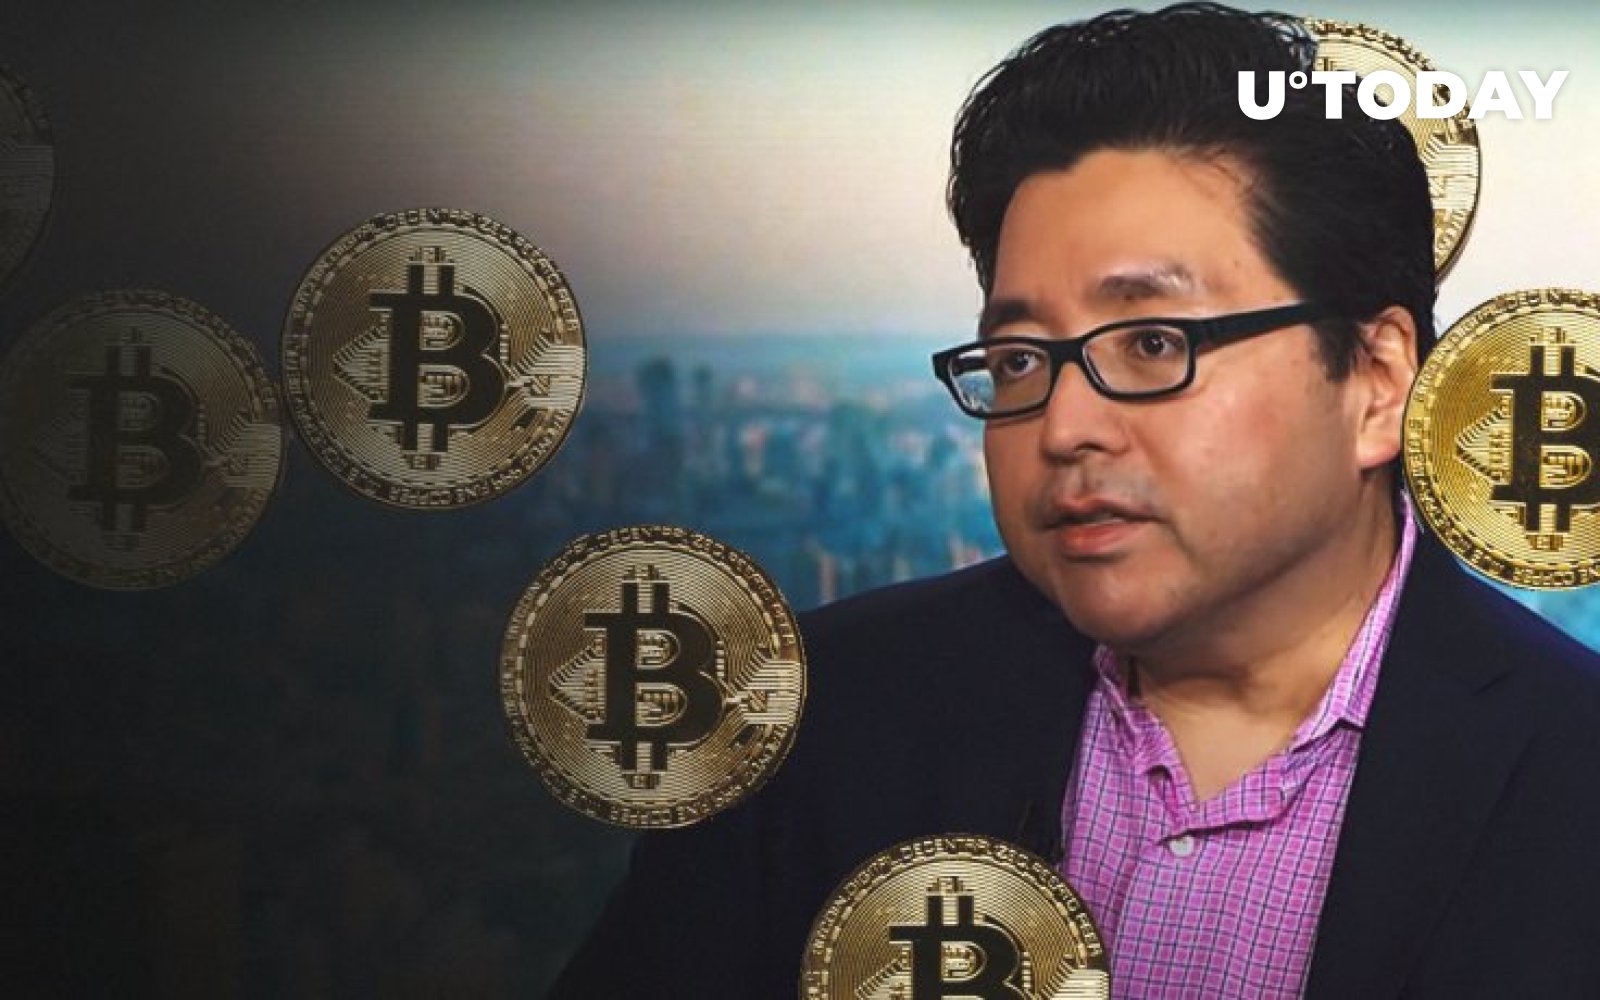 Here's How Bitcoin Could Hit $200,000, According to Fundstrat's Tom Lee